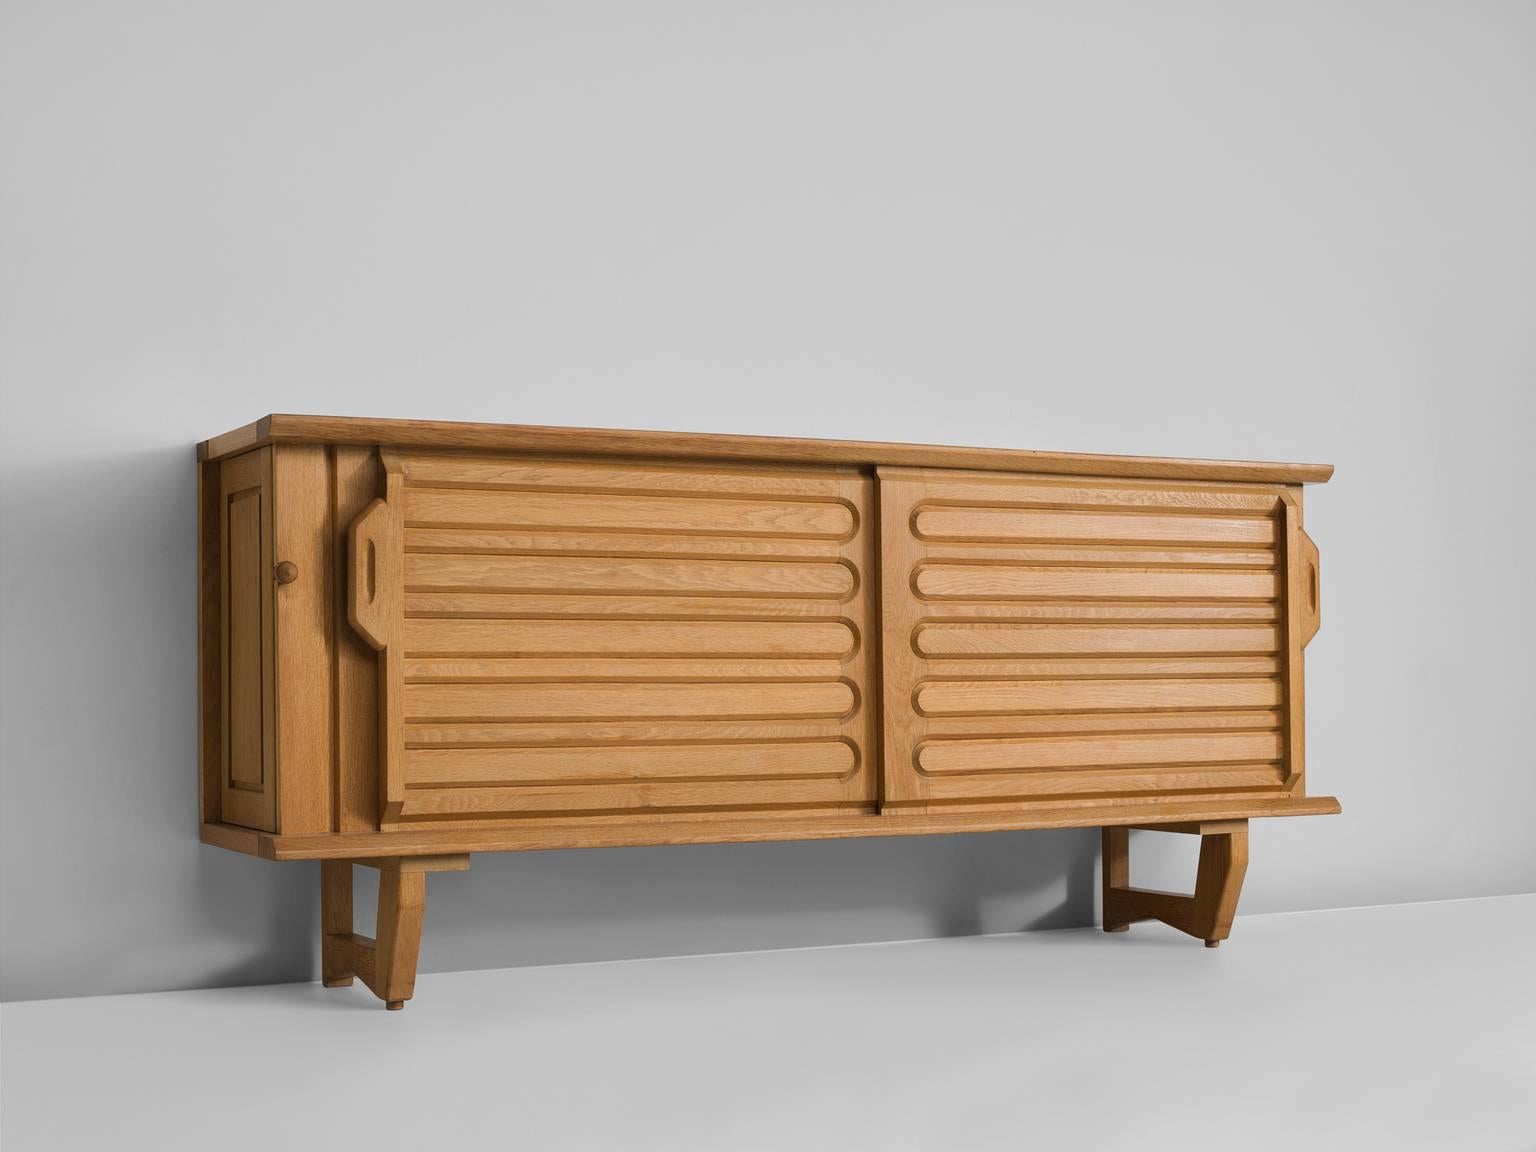 Sideboard in oak by Guillerme and Chambron, France 1960s.

Well proportioned piece, with horizontal engravings in the front sliding doors. 
The piece hides a small storage space on the side. In the top there are six colorful tiles placed into the